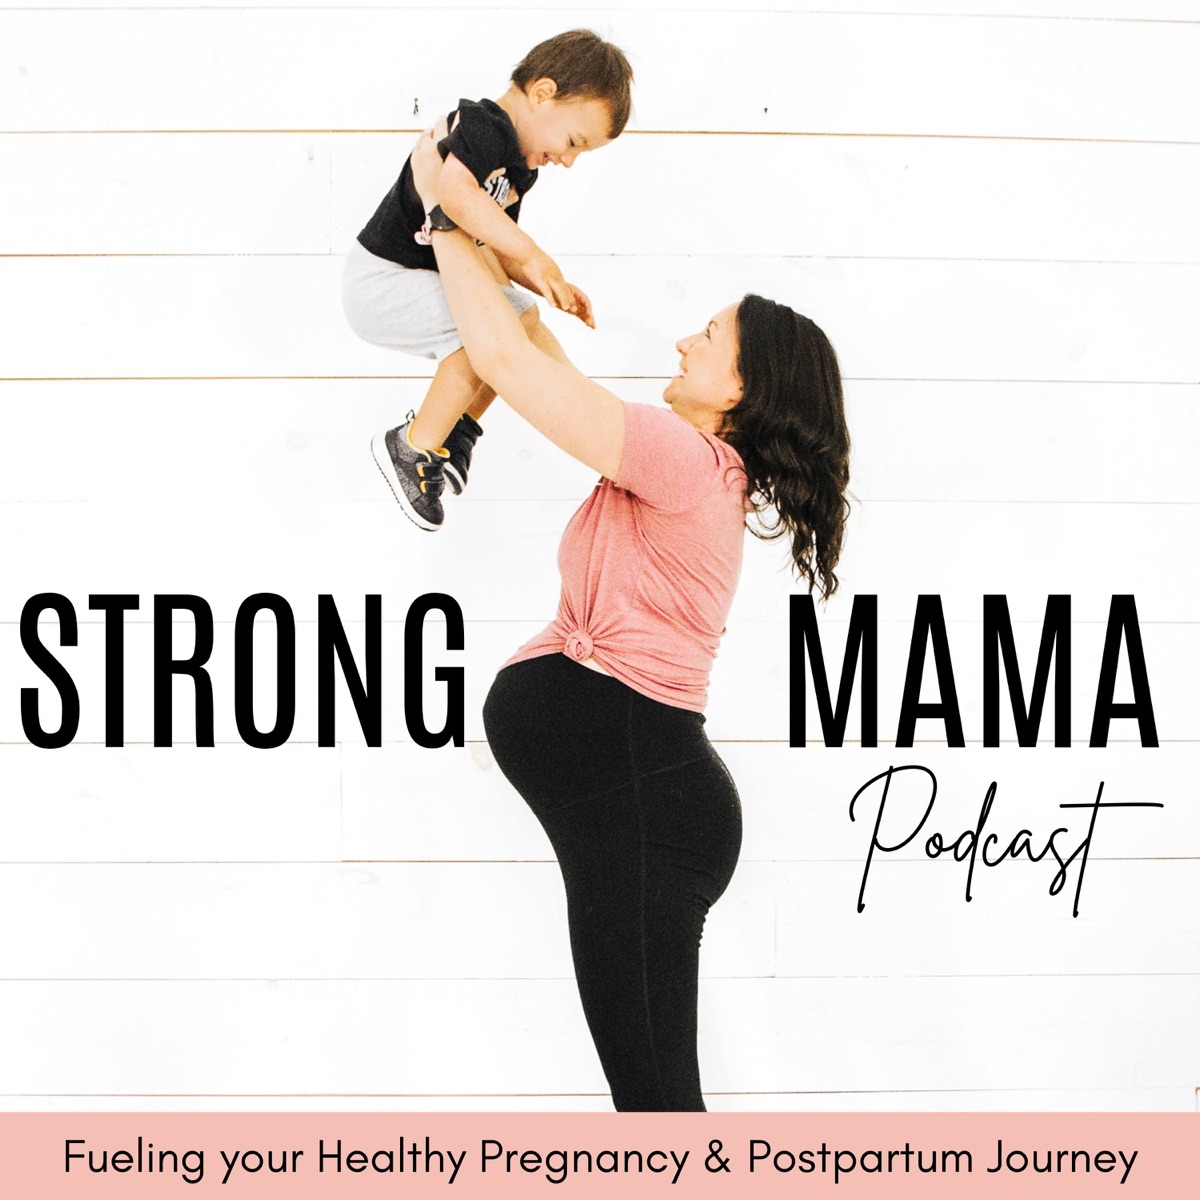 BirthPrep Yoga: Your Roadmap to an Empowered Birth Experience